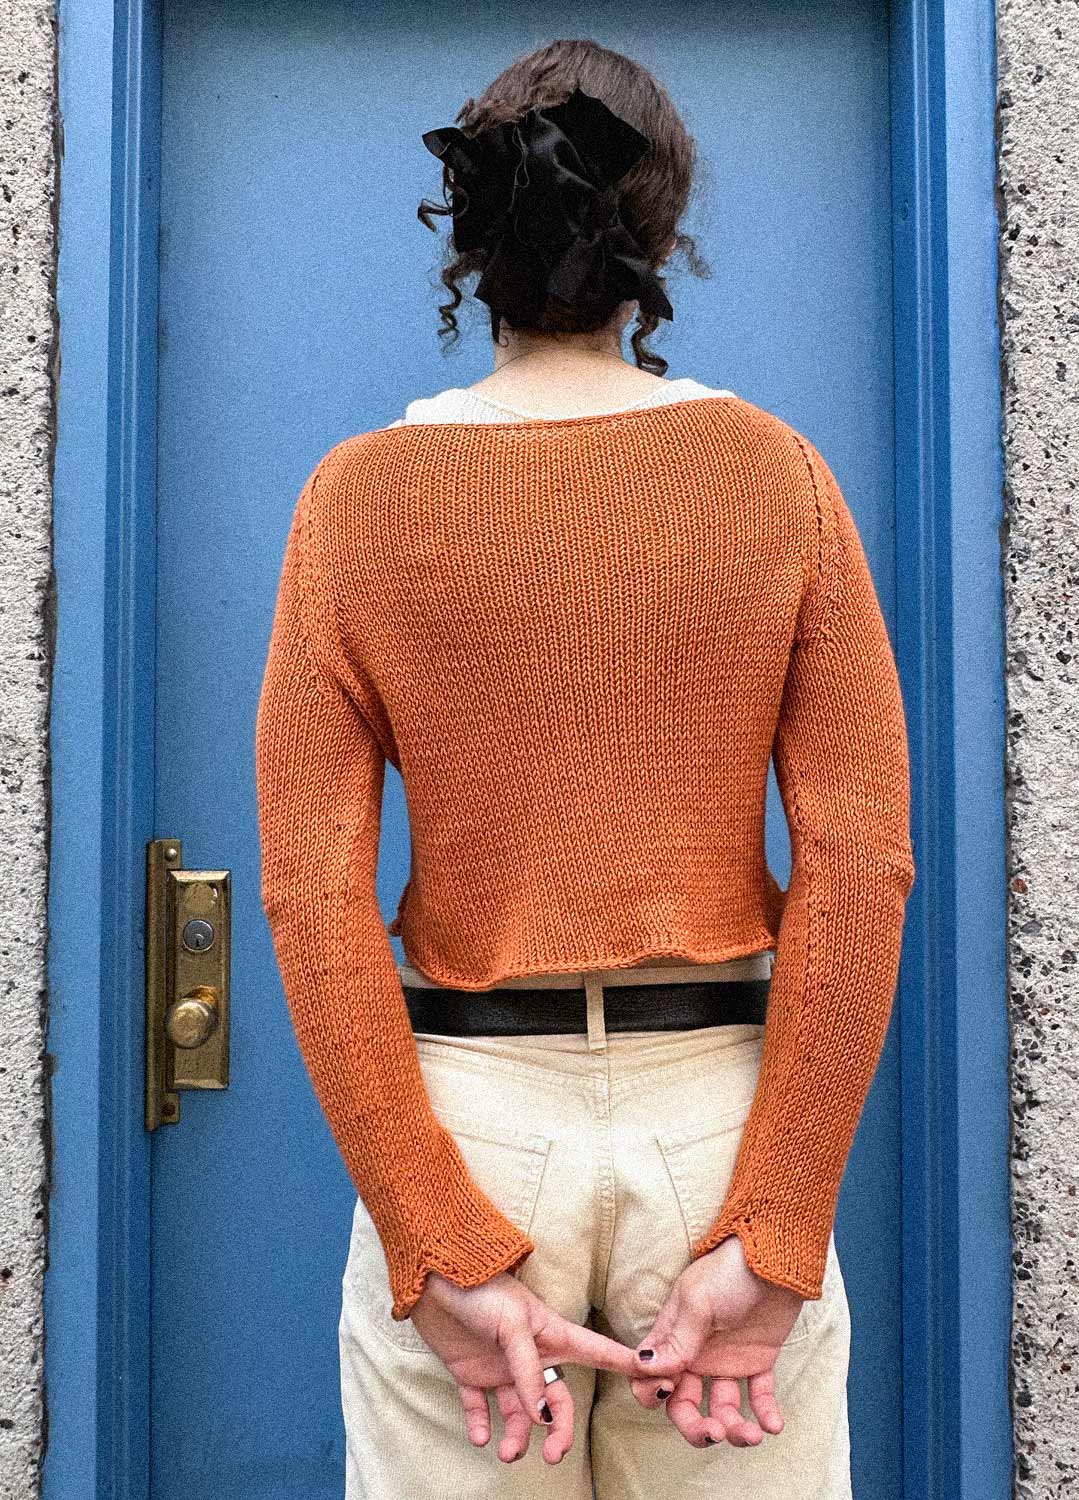 How to Knit a Sweater from the Bottom Up: Adding Waist Shaping